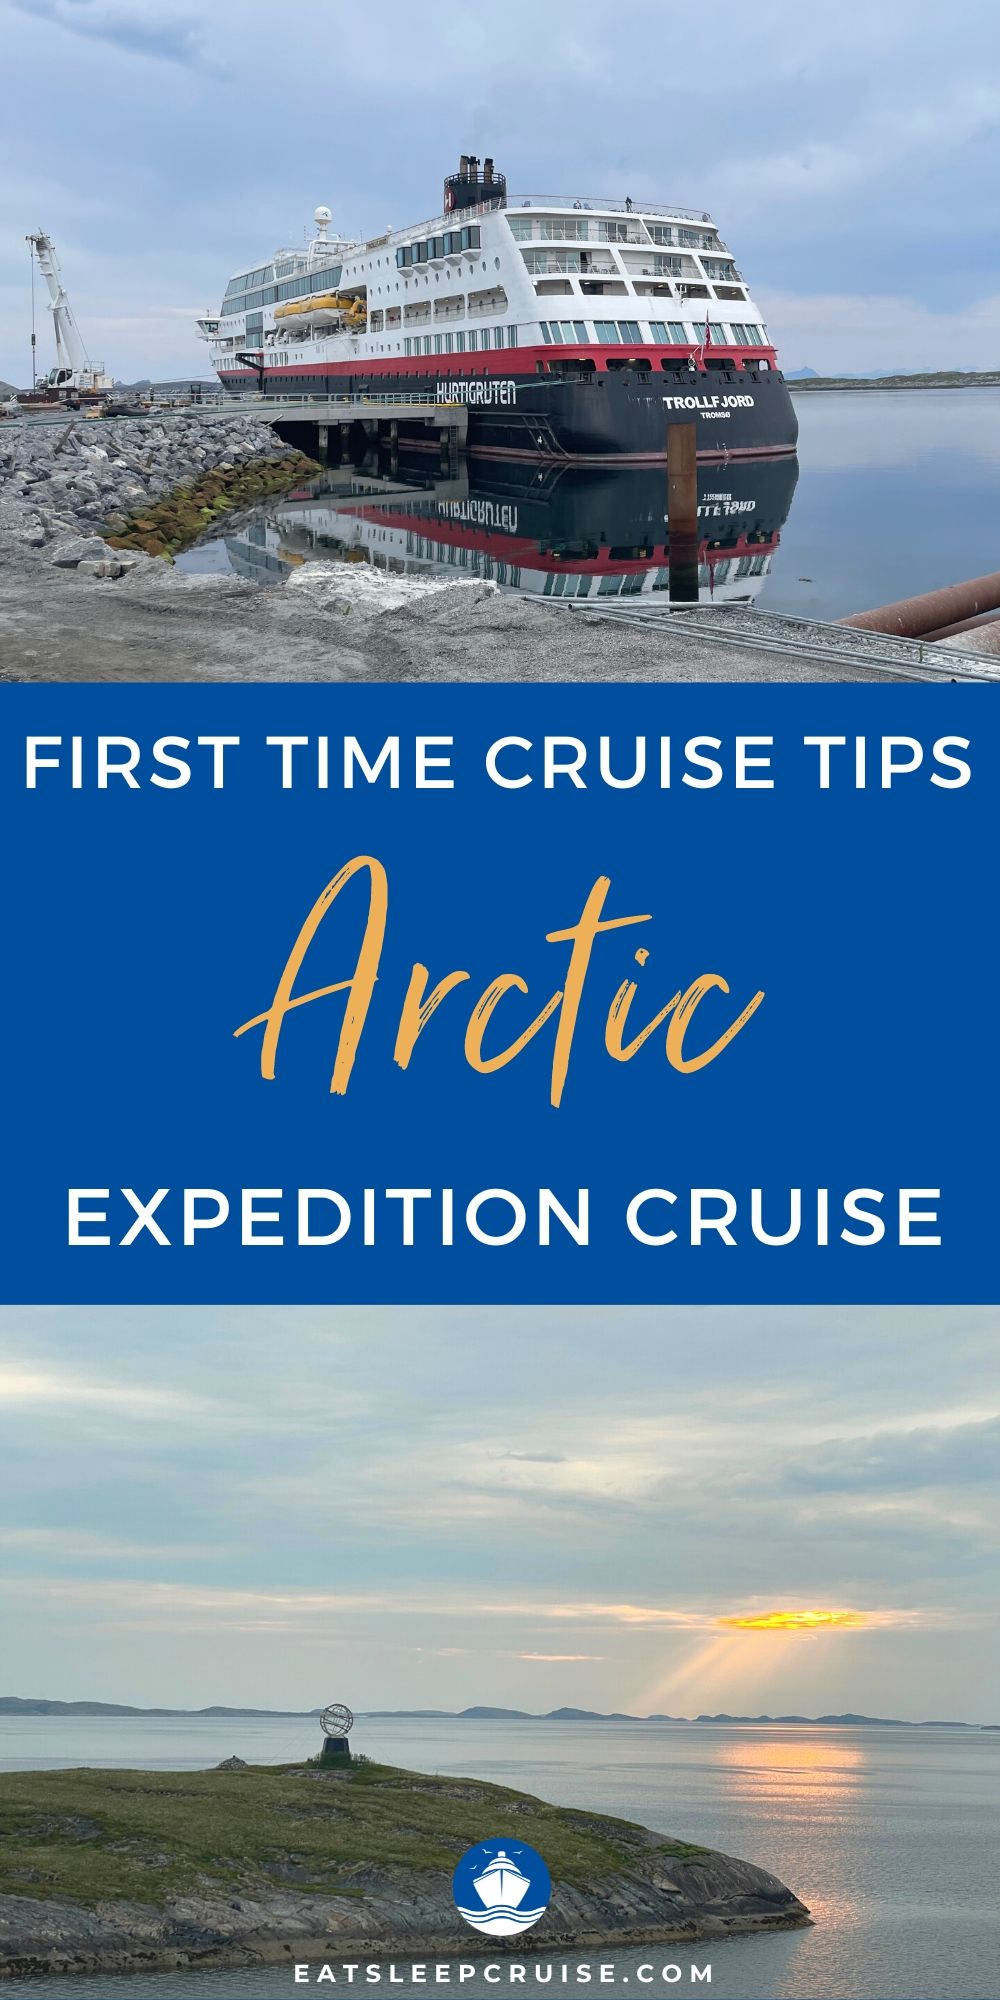 First Arctic Expedition Cruise